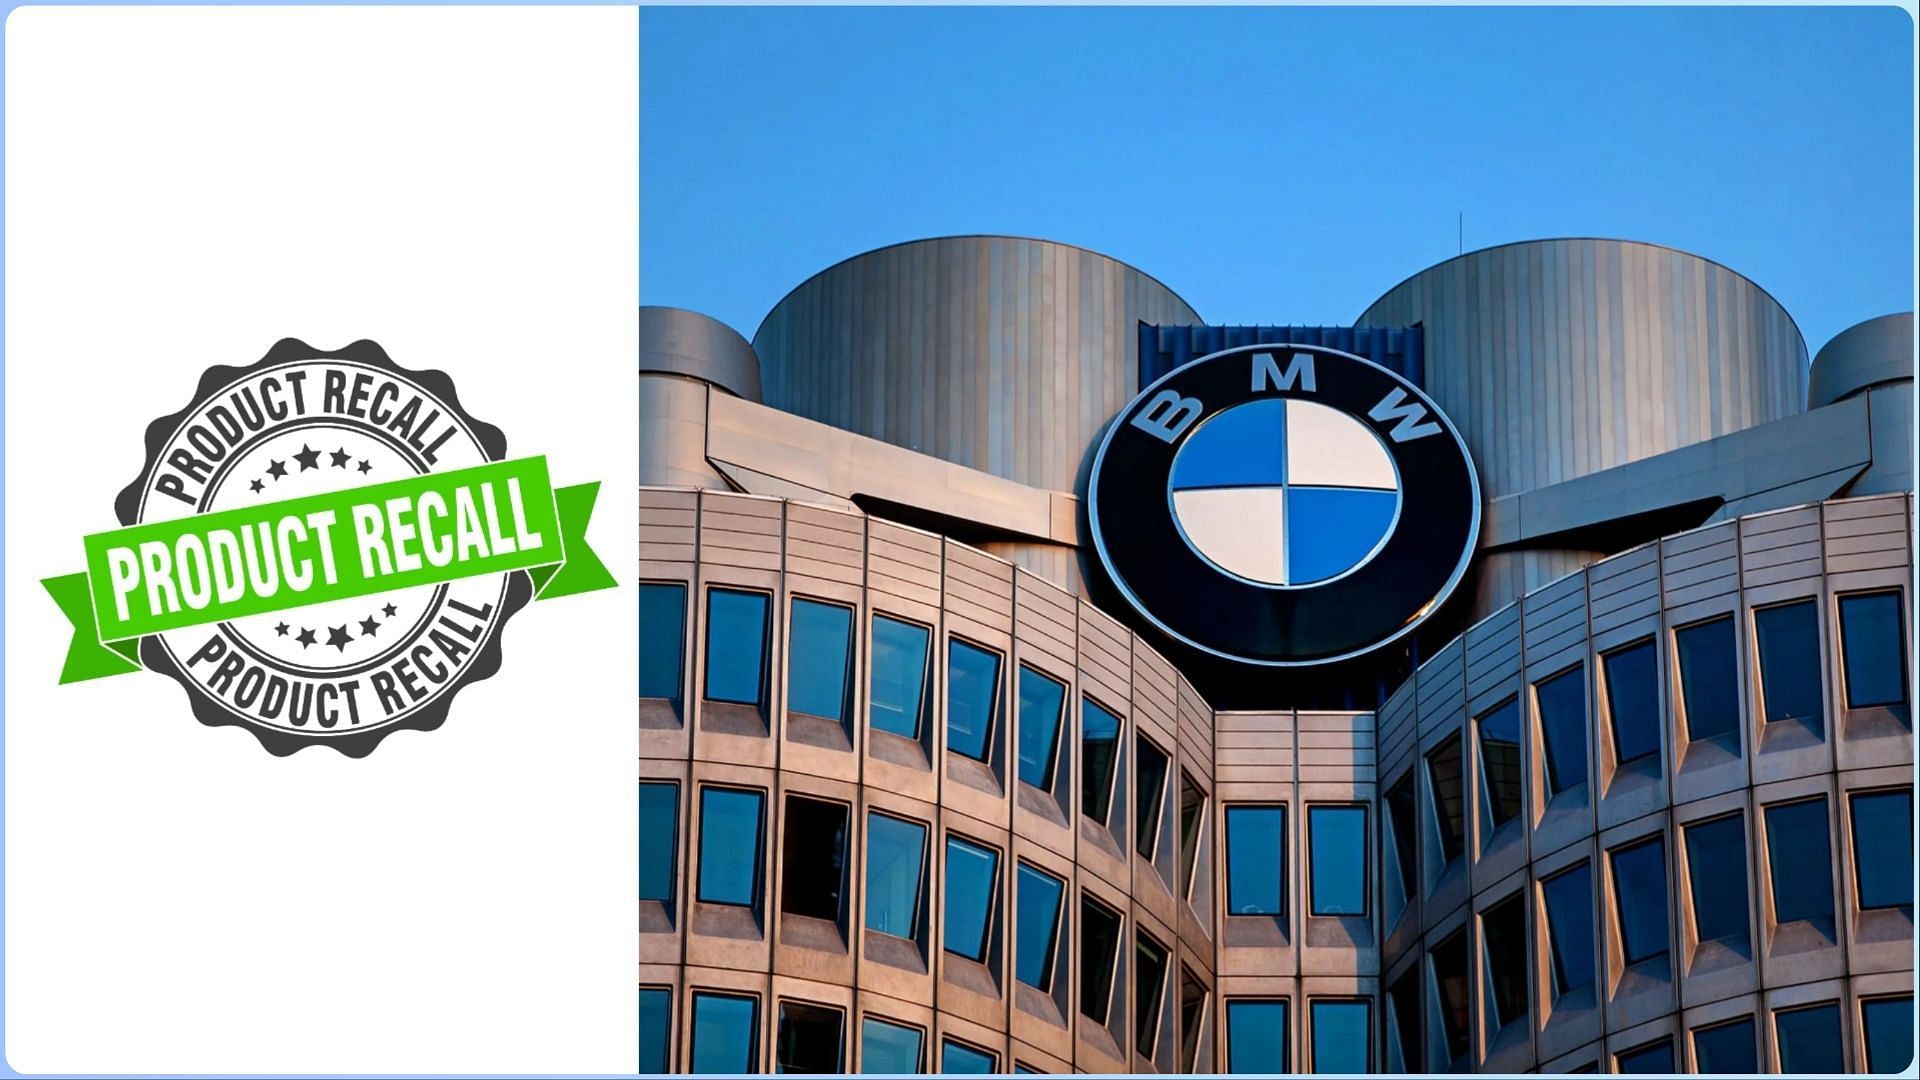 BMW issues a recall alert and &ldquo;Do Not Drive&rdquo; warning for over 90,000 older vehicles due to faulty Takata airbags (Image via Bloomberg/ Getty Images)